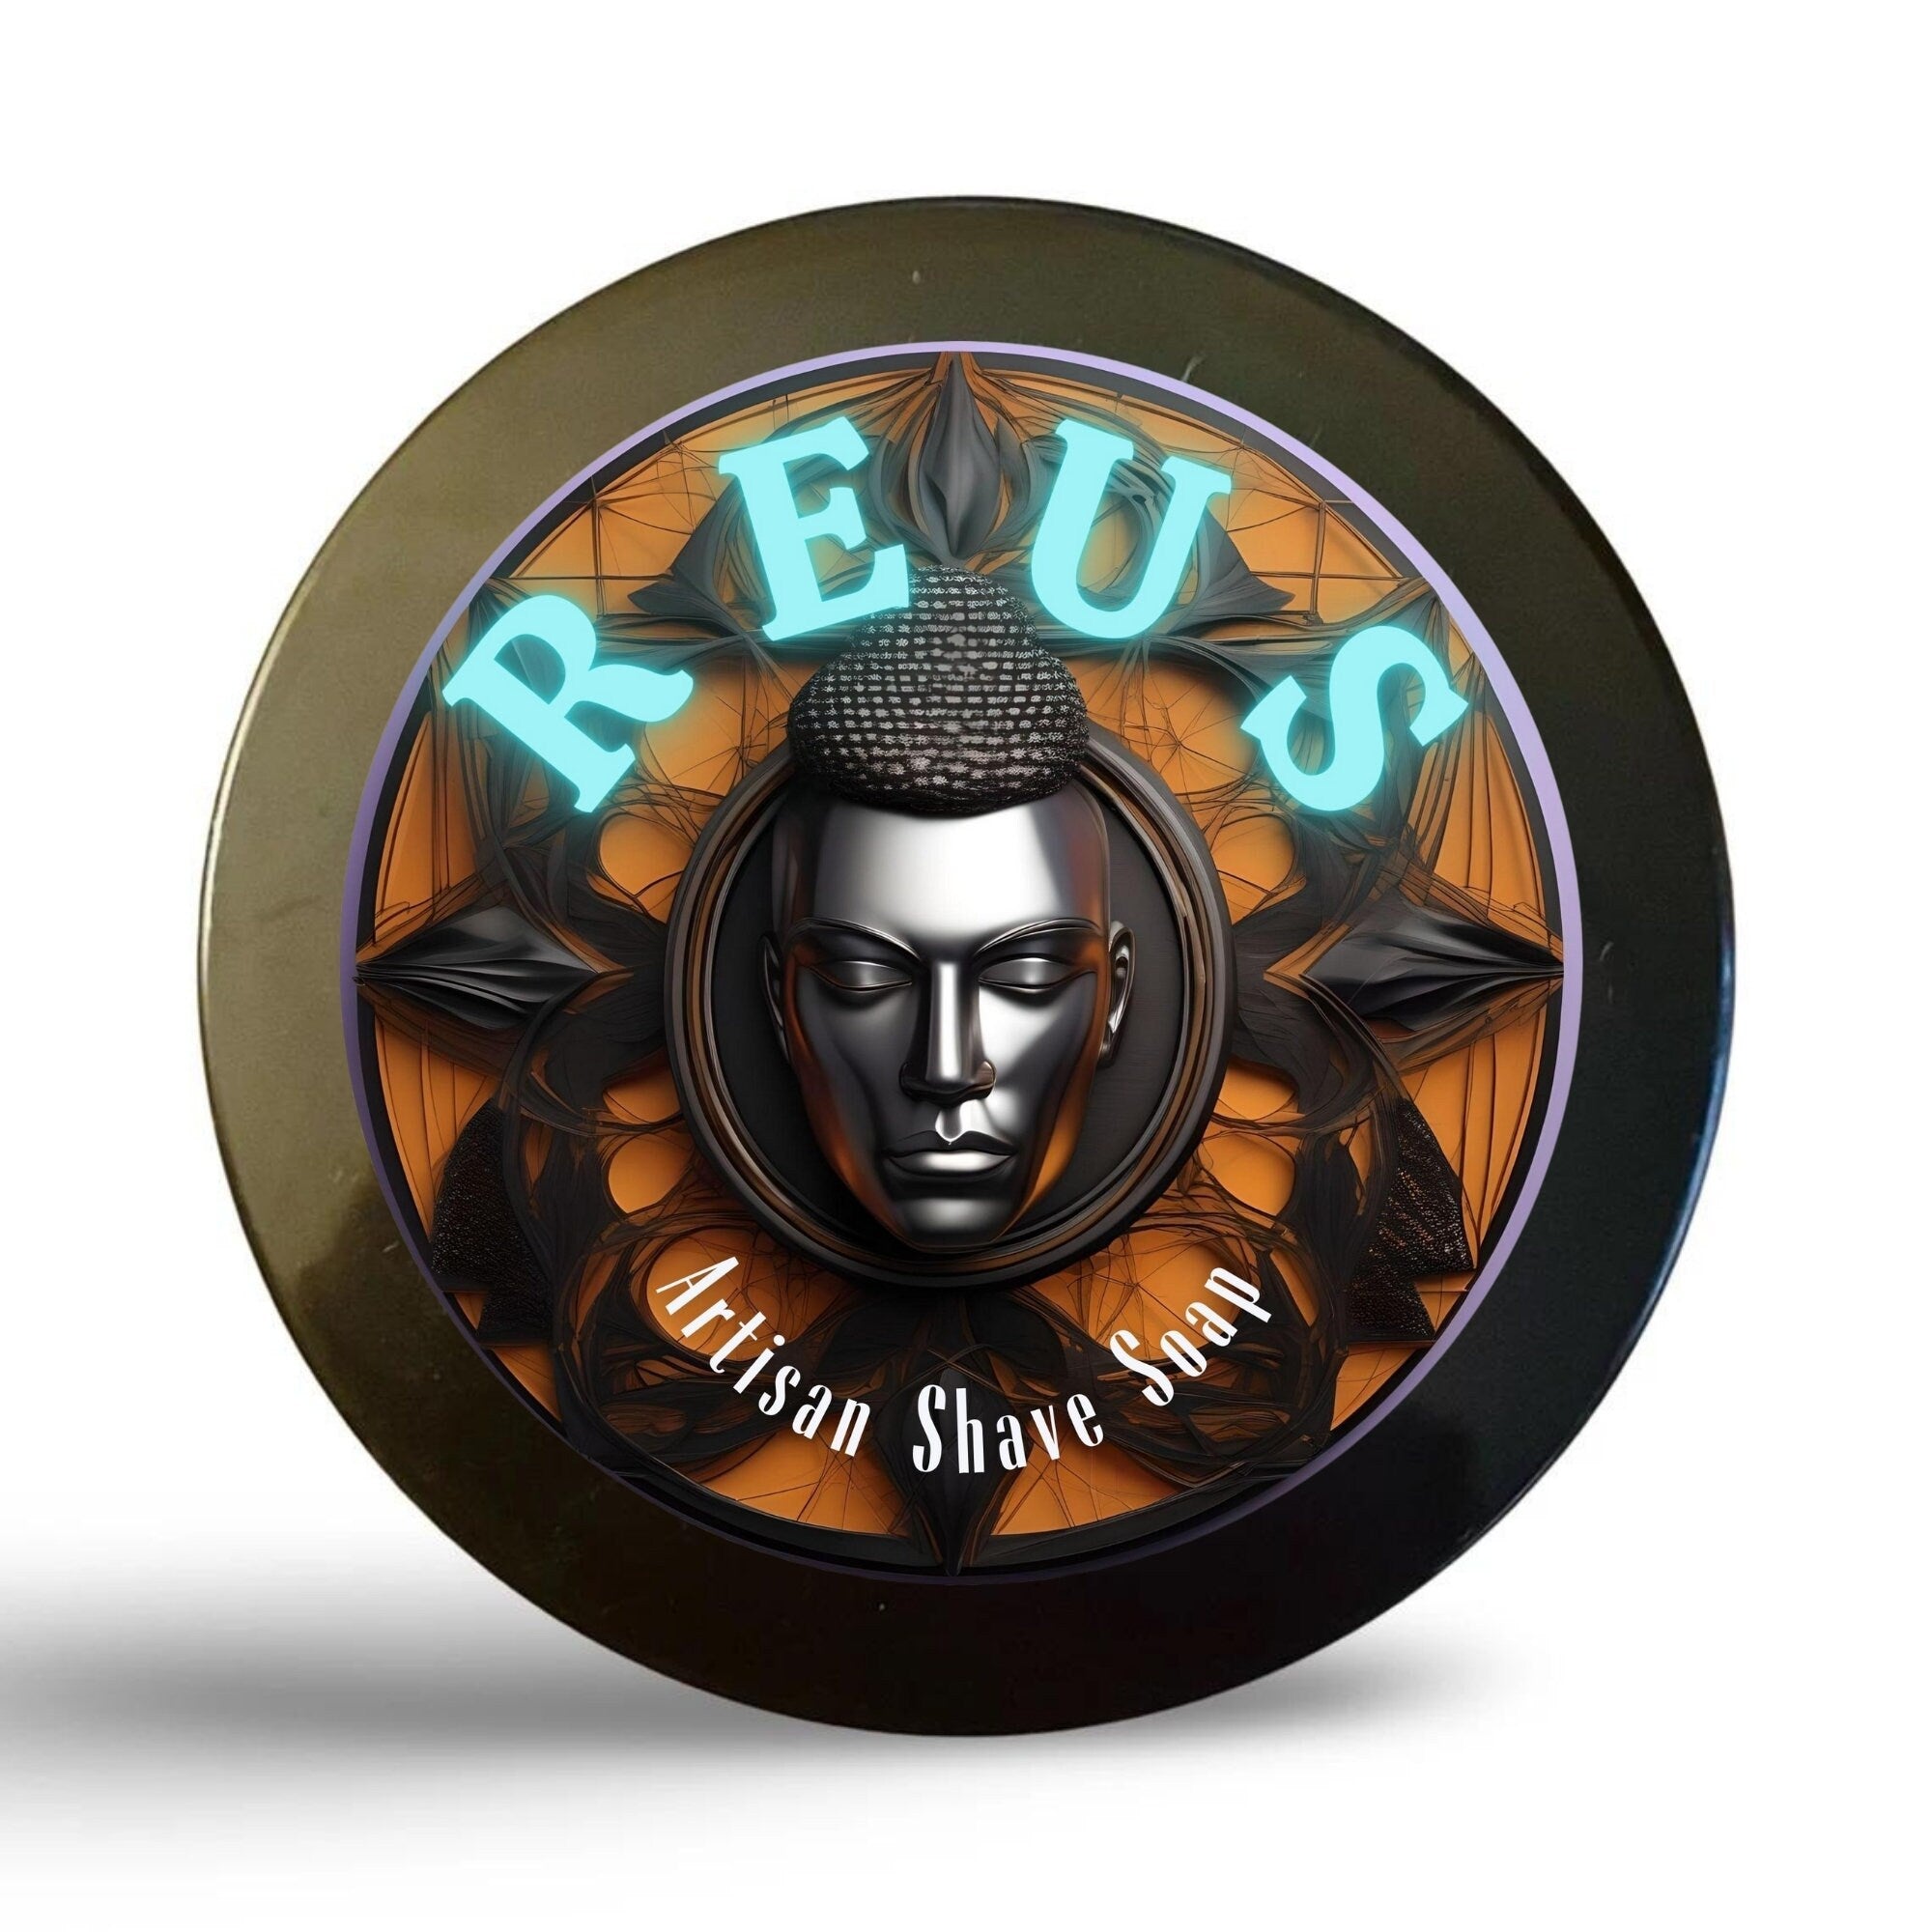 Artisan-Made Shaving Soap with Tallow Shea and Cocoa Butter for Thick Lather by Haylis